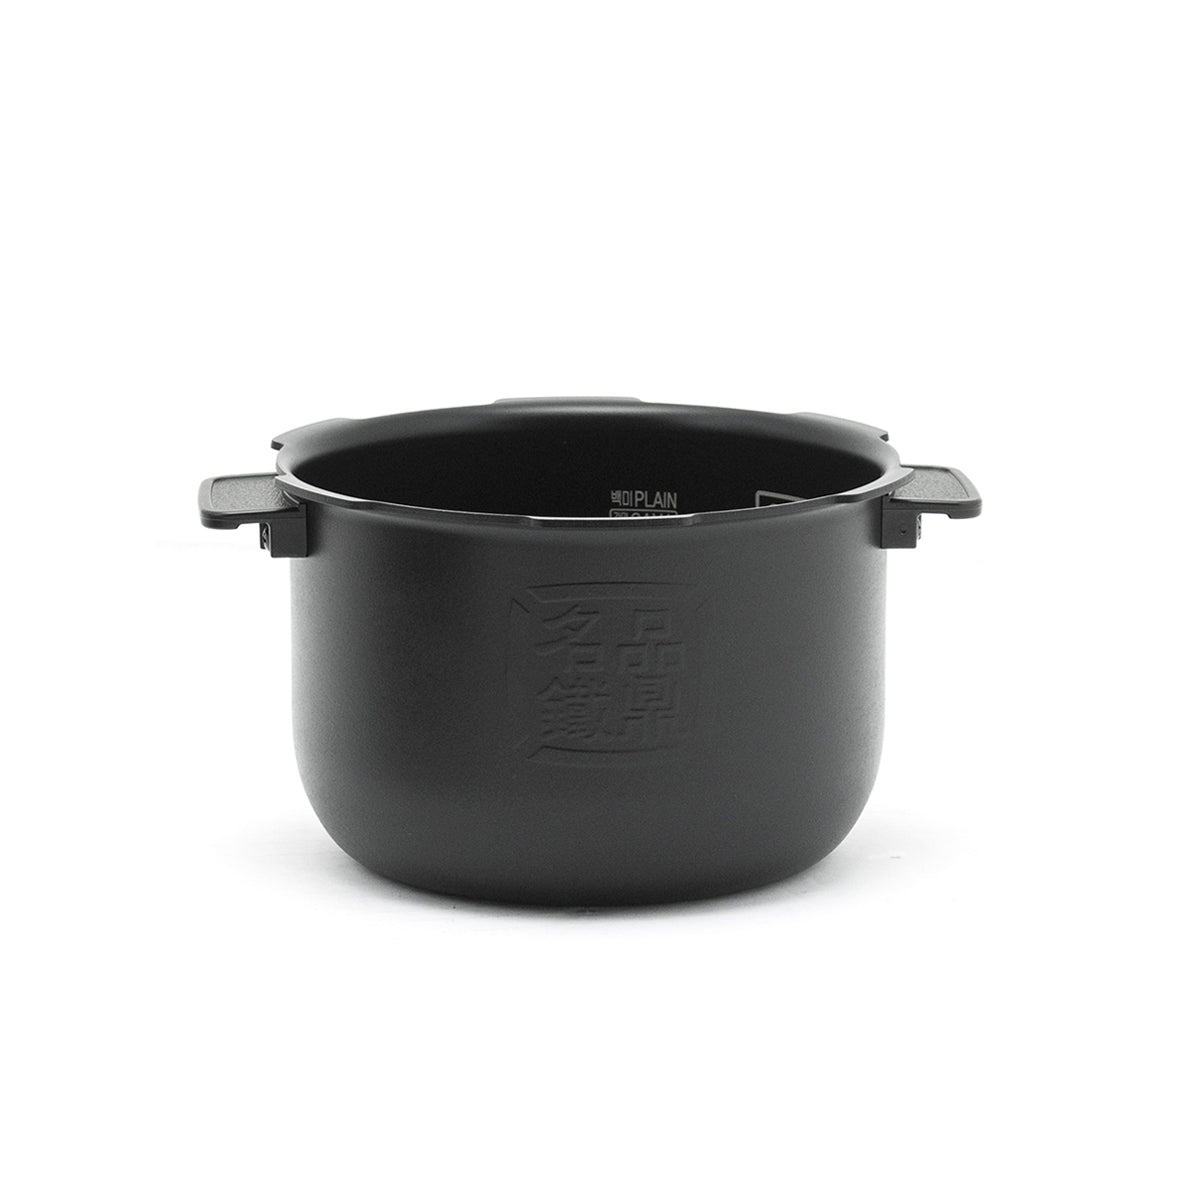 Dimchae Cook Stainless Inner Pot (6 Cup) - Dimchae USA